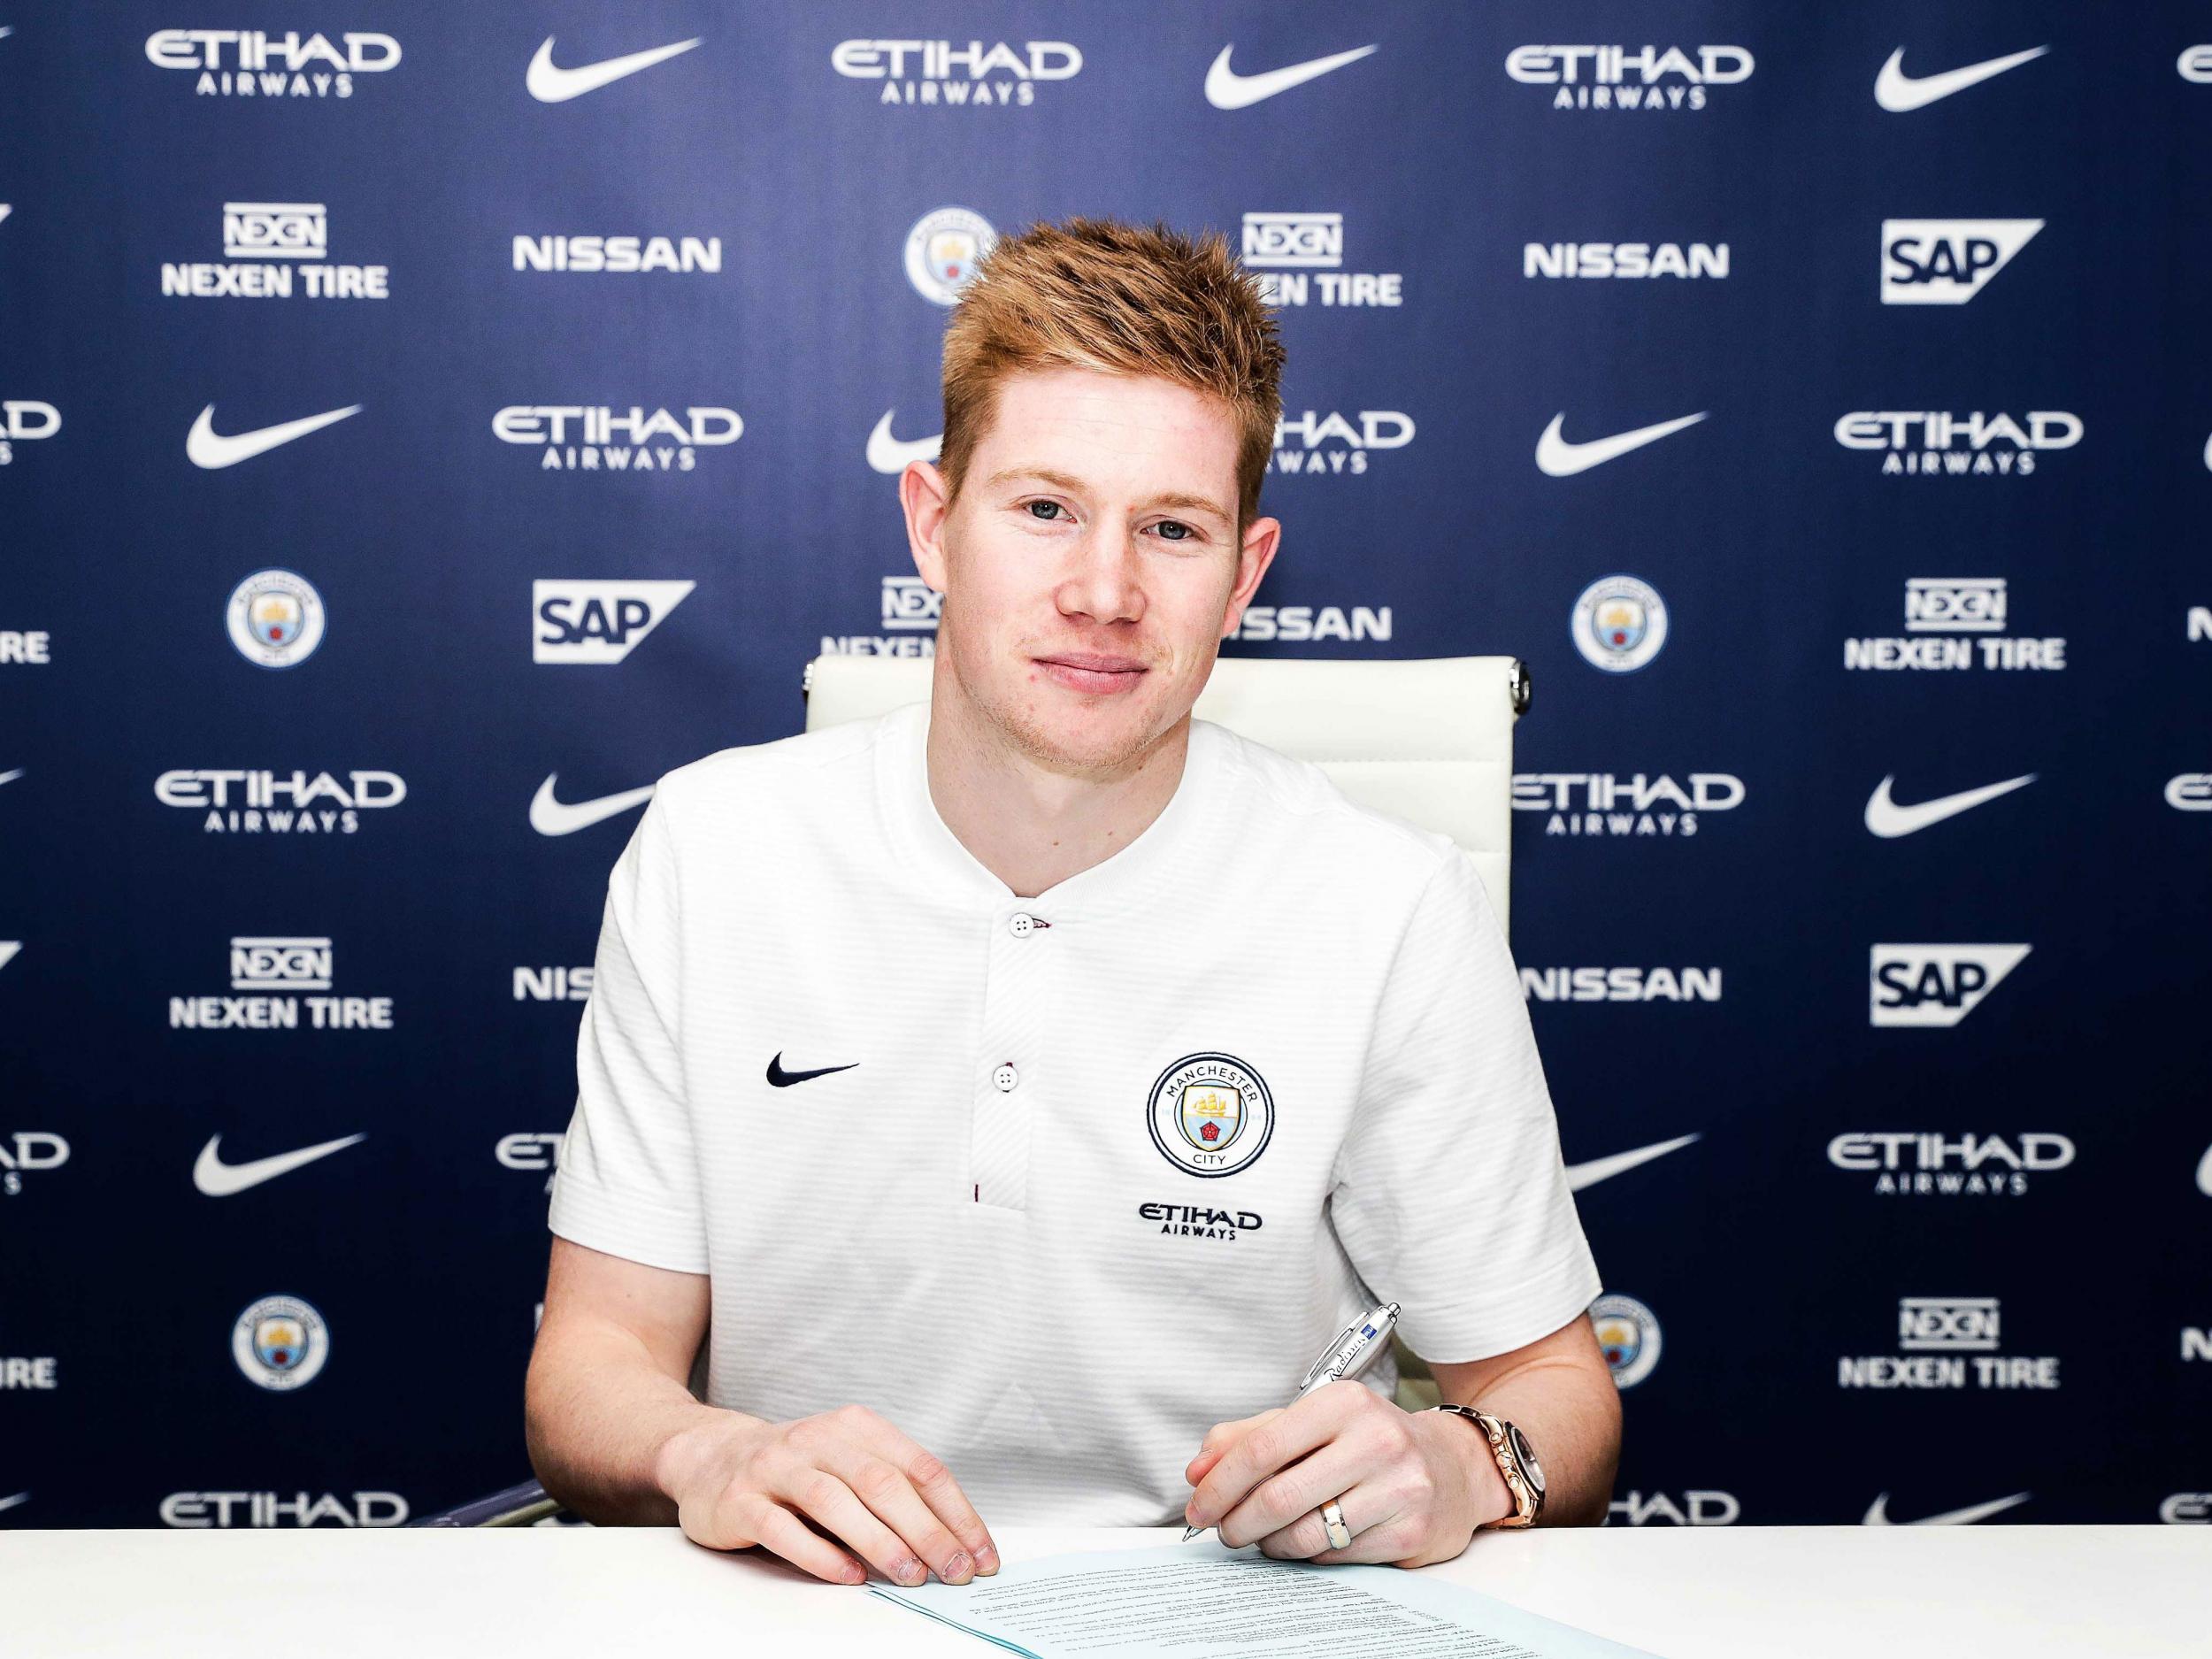 Kevin De Bruyne has signed a new five-year contract with Manchester City